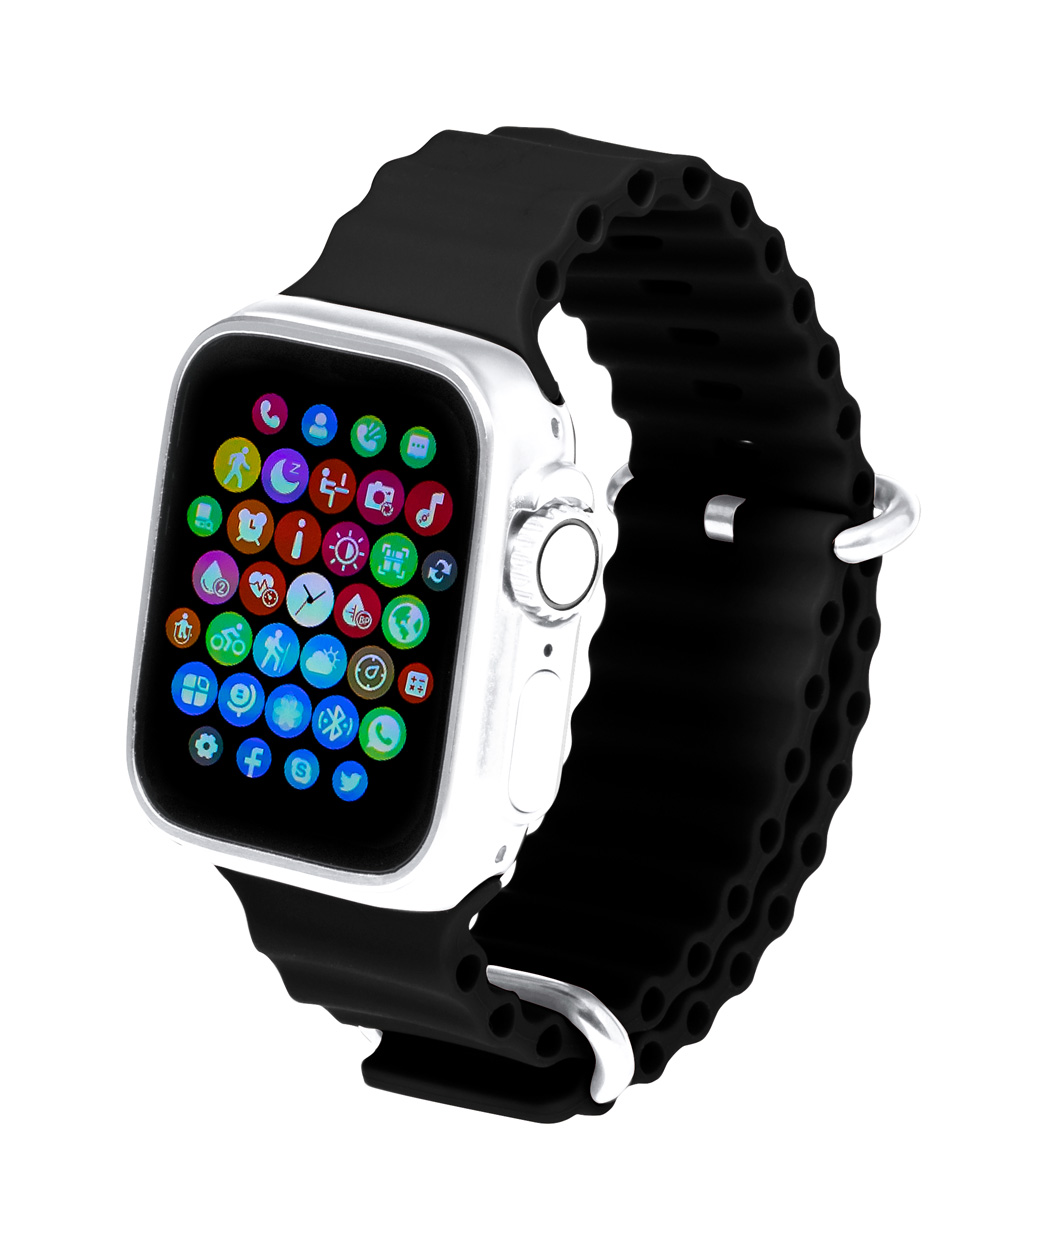 Smartwatch CONNOR with colour display - black